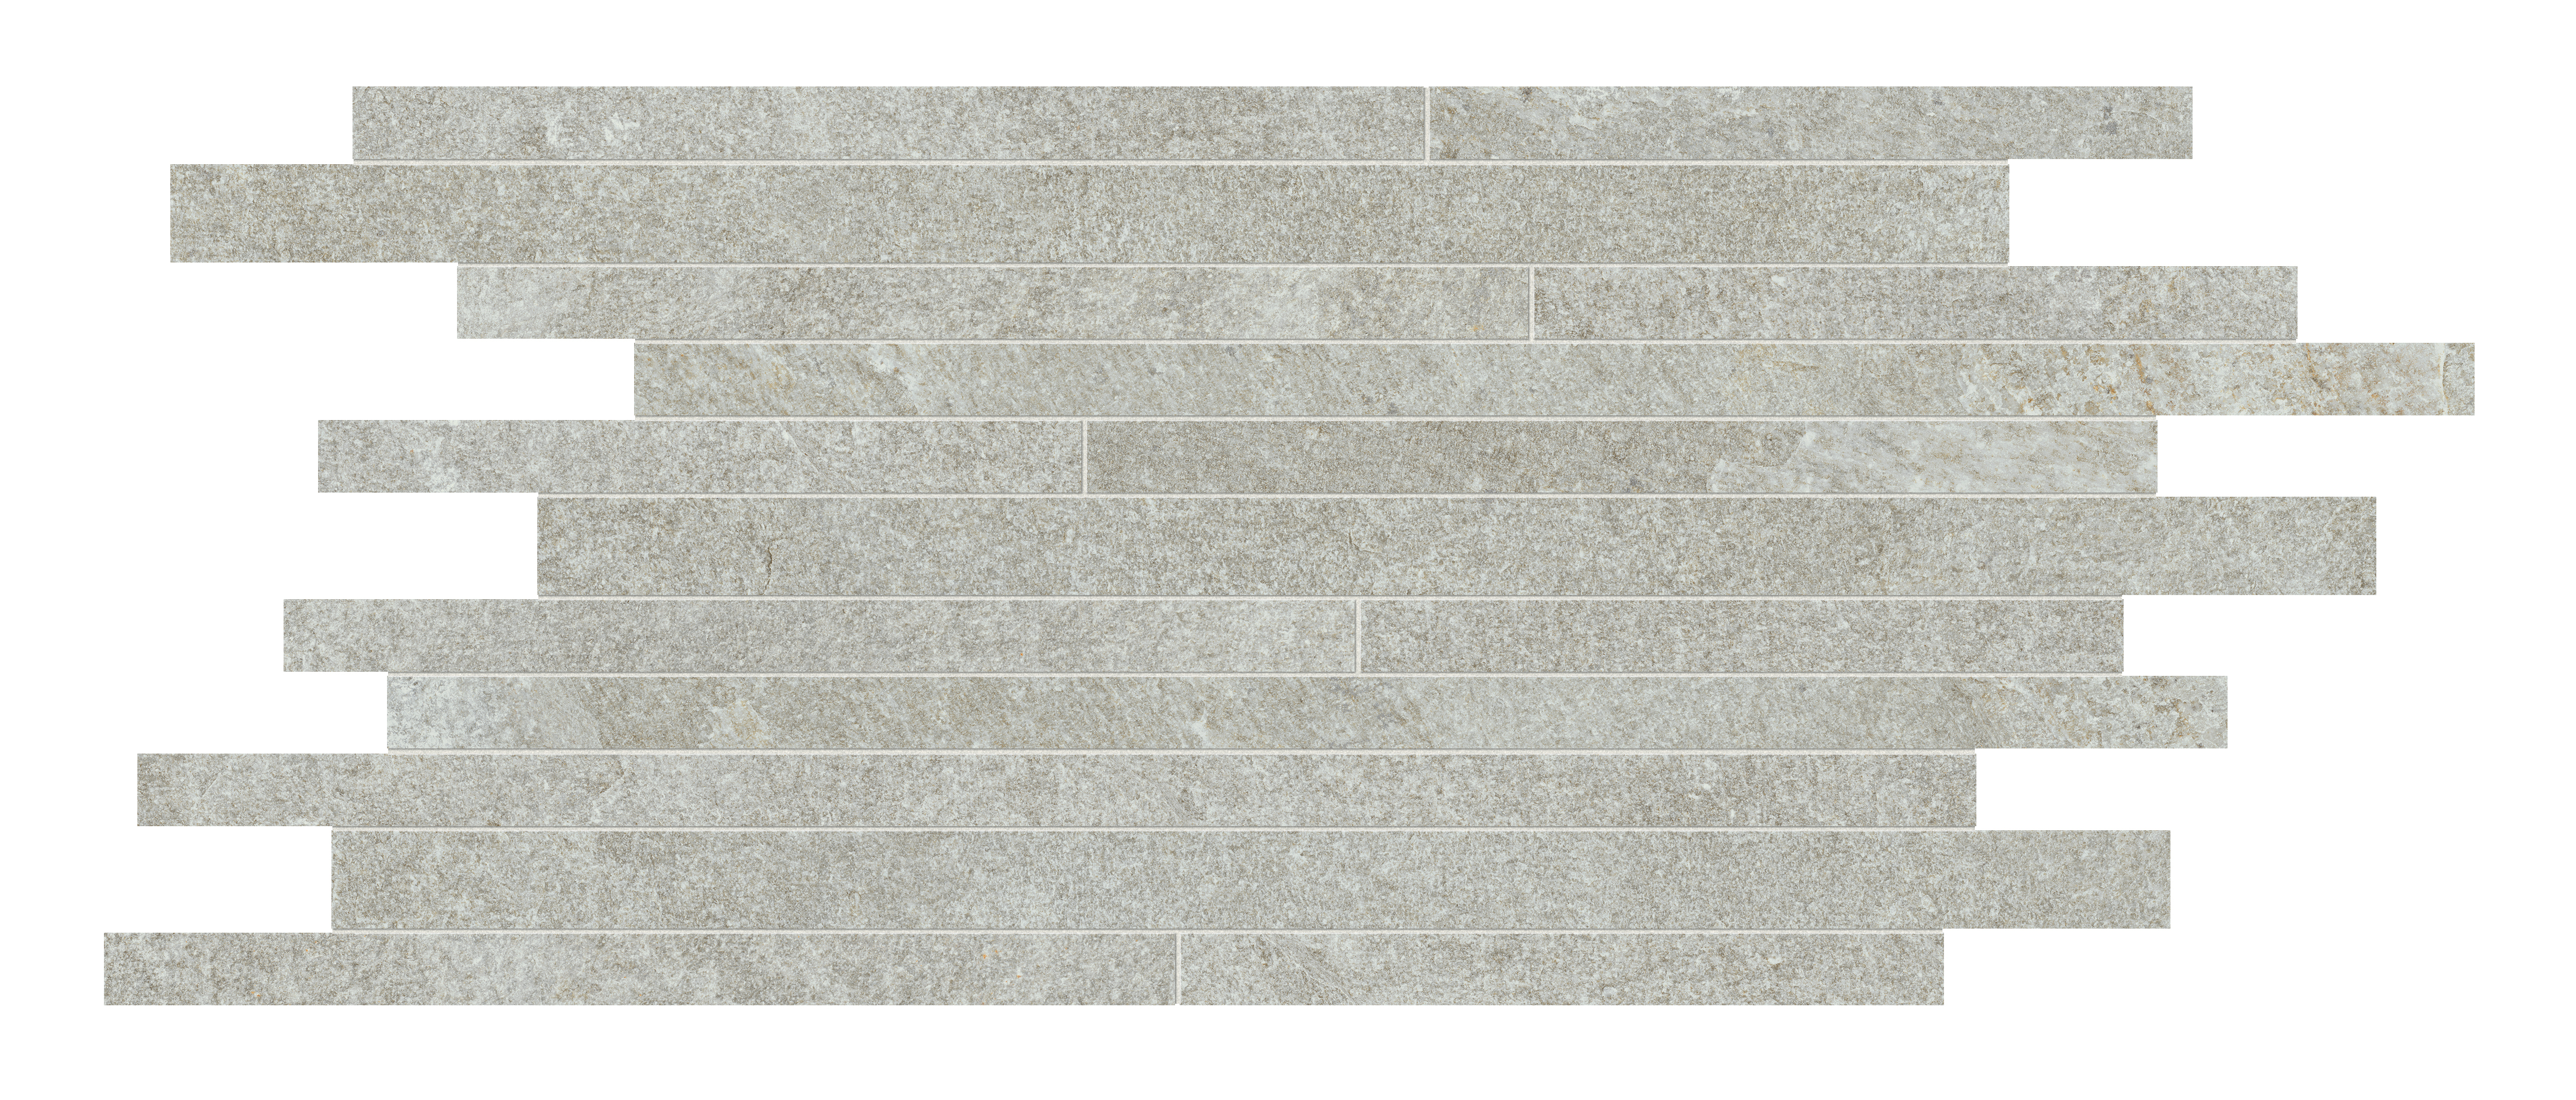 Marcacorona Pearl Strutturato Hithick Line Tessere J098 30x60cm rectified 9mm